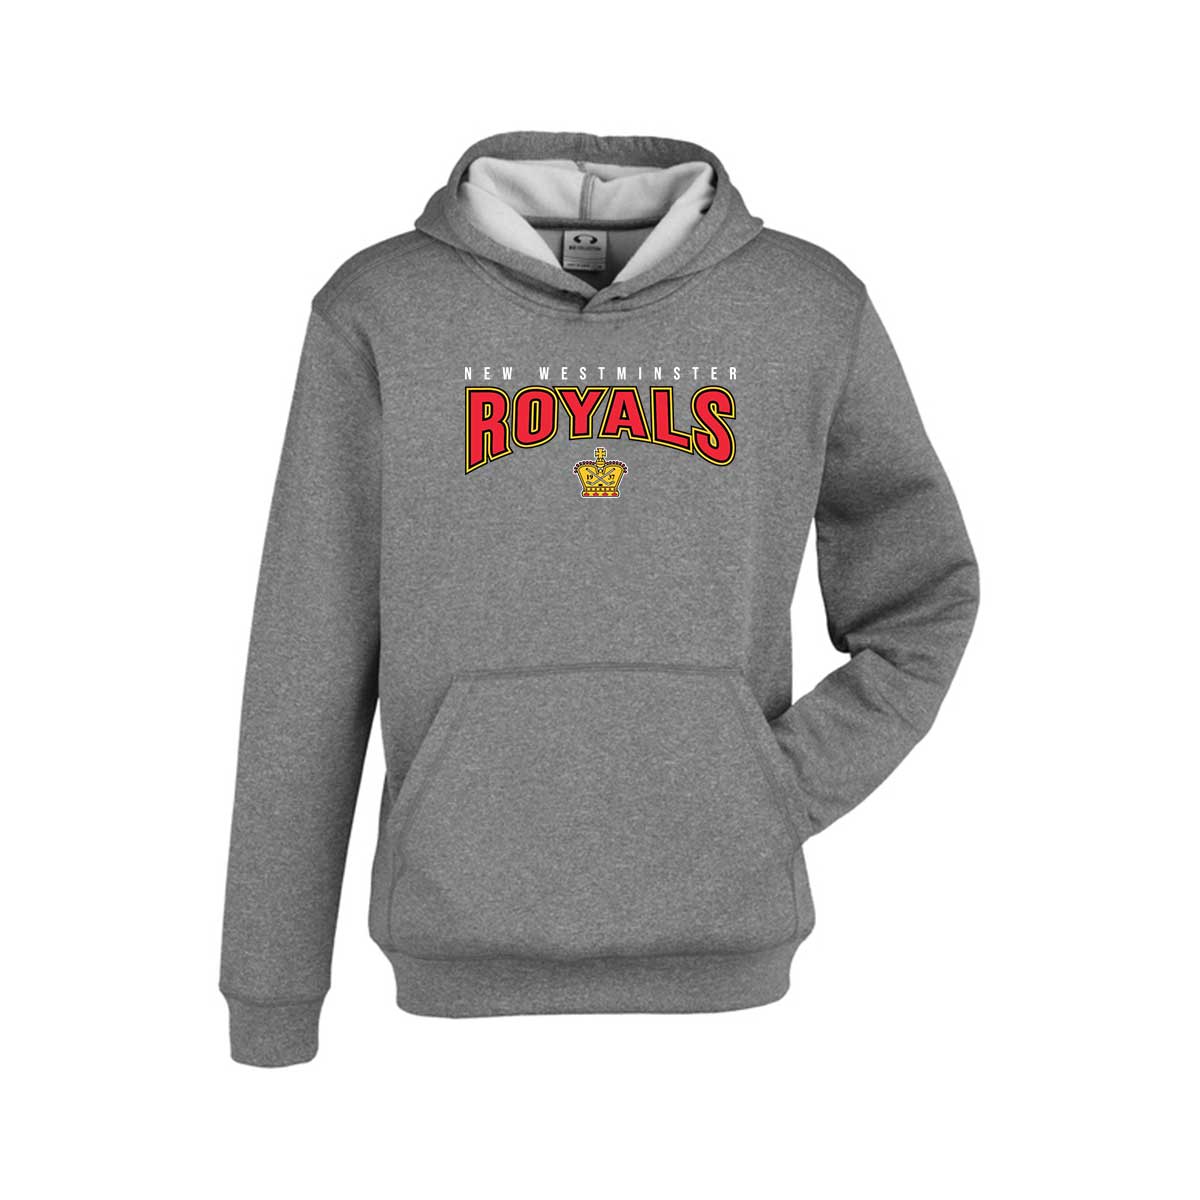 New West Royals -- Youth Hype Hoody